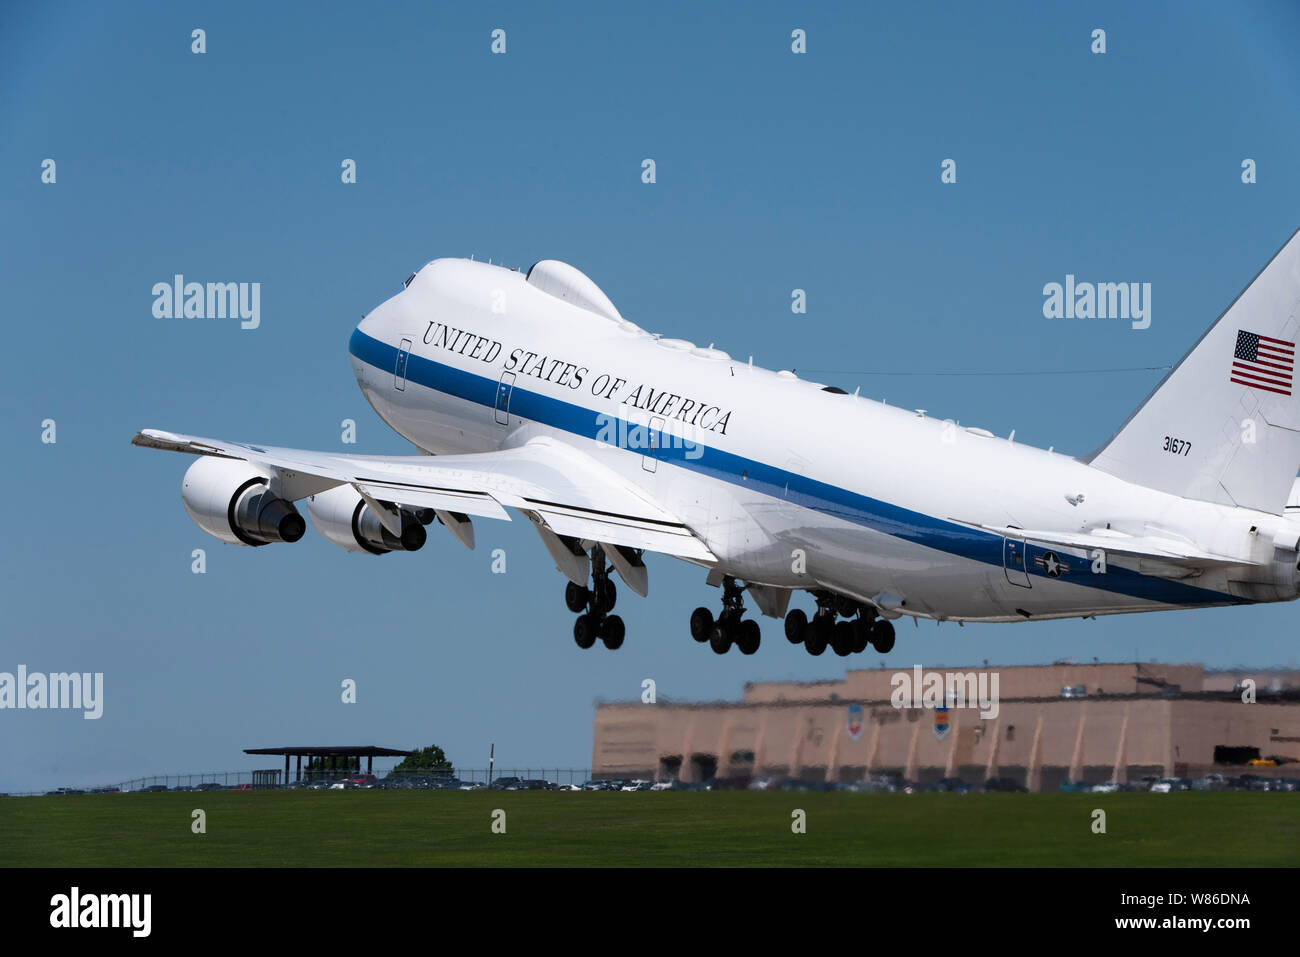 A U.S. Air Force E-4B National Airborne Operations Center aircraft takes off from Offutt Air Force Base, Nebraska, July 10, 2019.The main deck is divided into six functional areas: a command work area, a conference room, a briefing room, an operations team work area, a communications area and a rest area.(U.S. Air Force photo by Staff Sgt. Jacob Skovo) Stock Photo